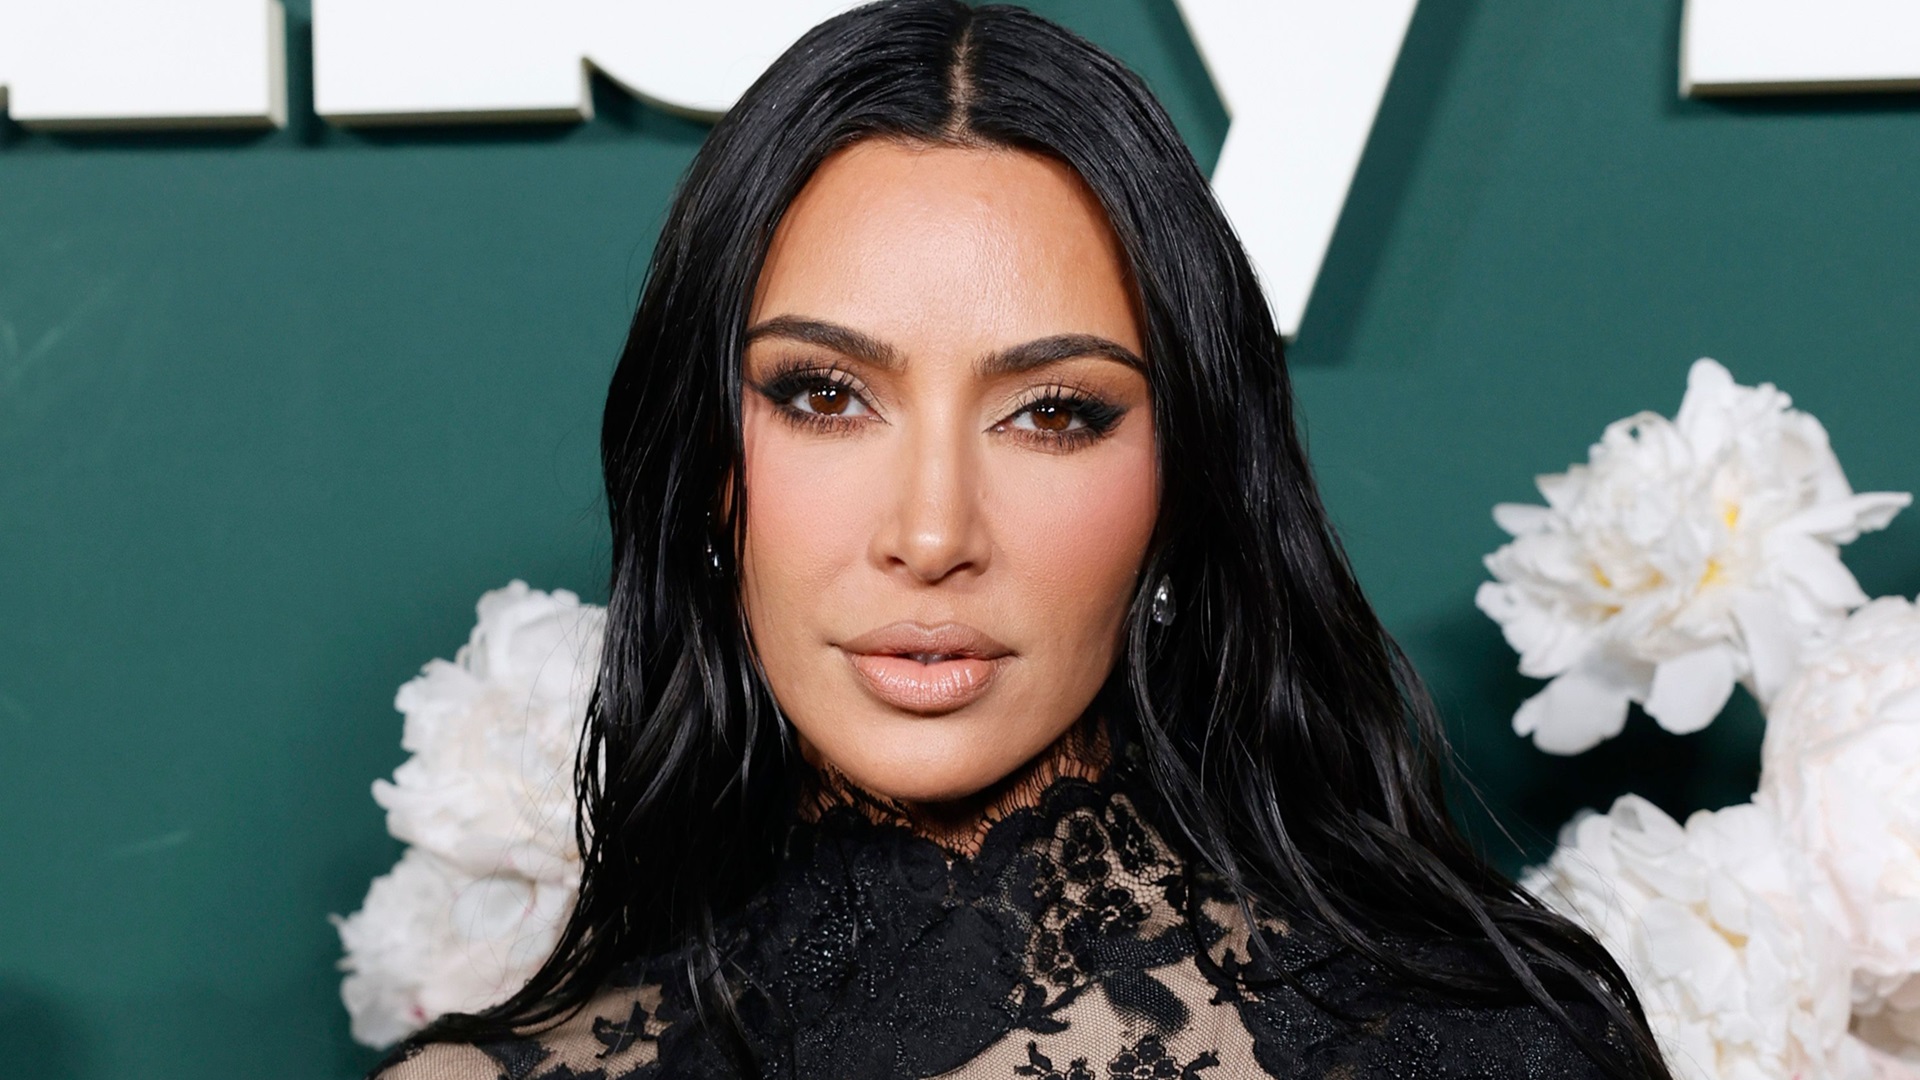 Why did Kim Kardashian get the title 'Man of the Year'?